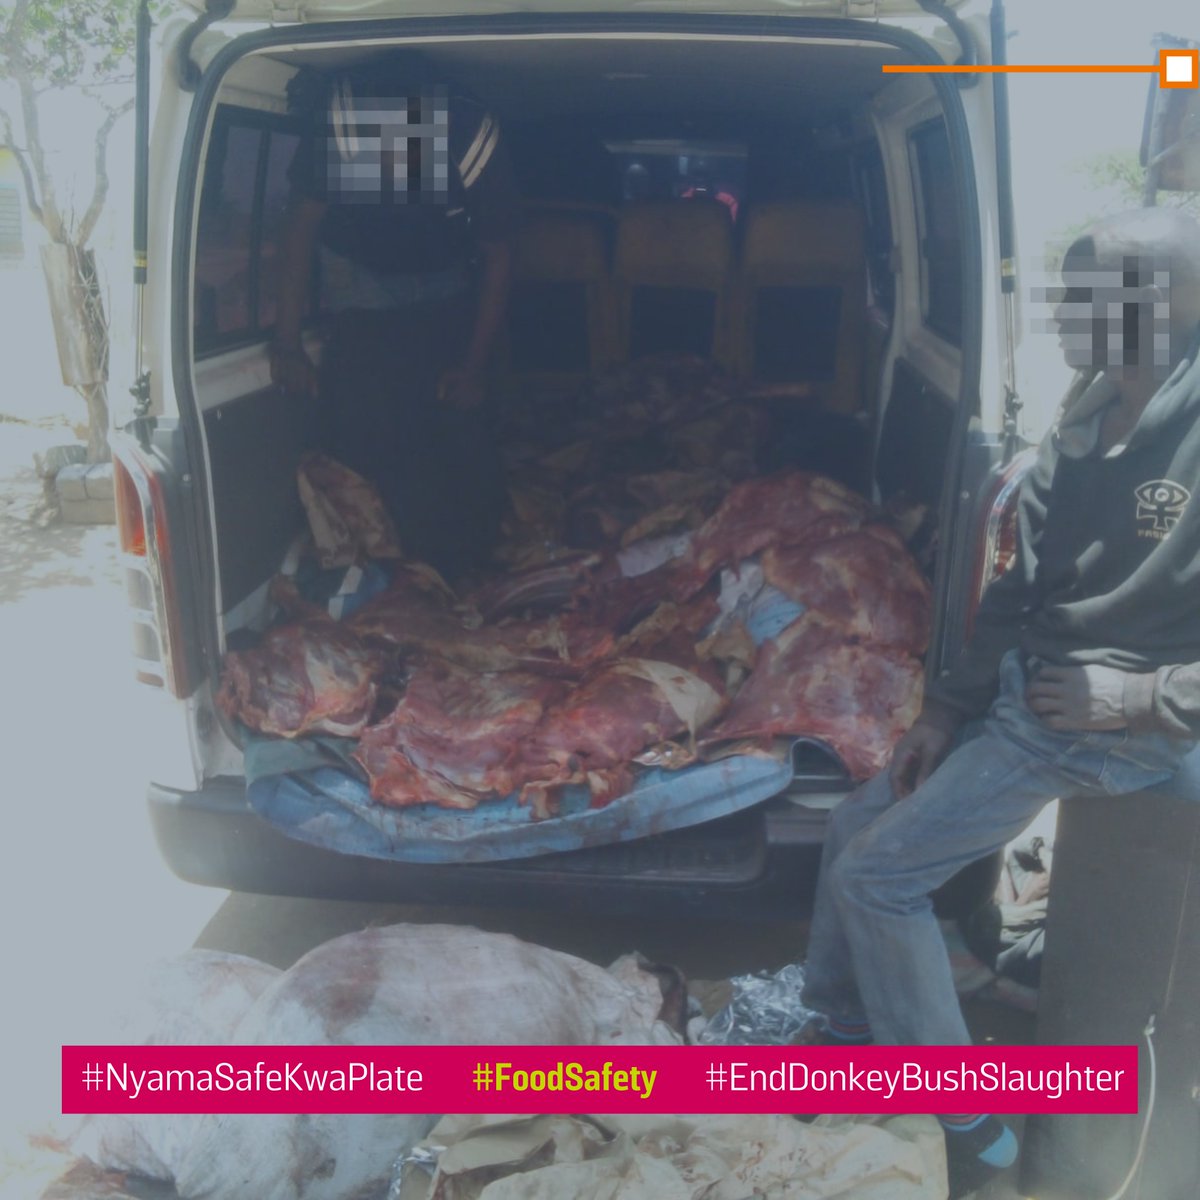 3/3 Let's prioritize our health and safety. Choose wisely when purchasing meat and avoid the dangers of illegally sourced donkey bush slaughter meat. Together, we can protect ourselves and our communities. Stay safe! 🧡 #NyamaSafeKwaPlate #FoodSafety #EndDonkeyBushSlaughter